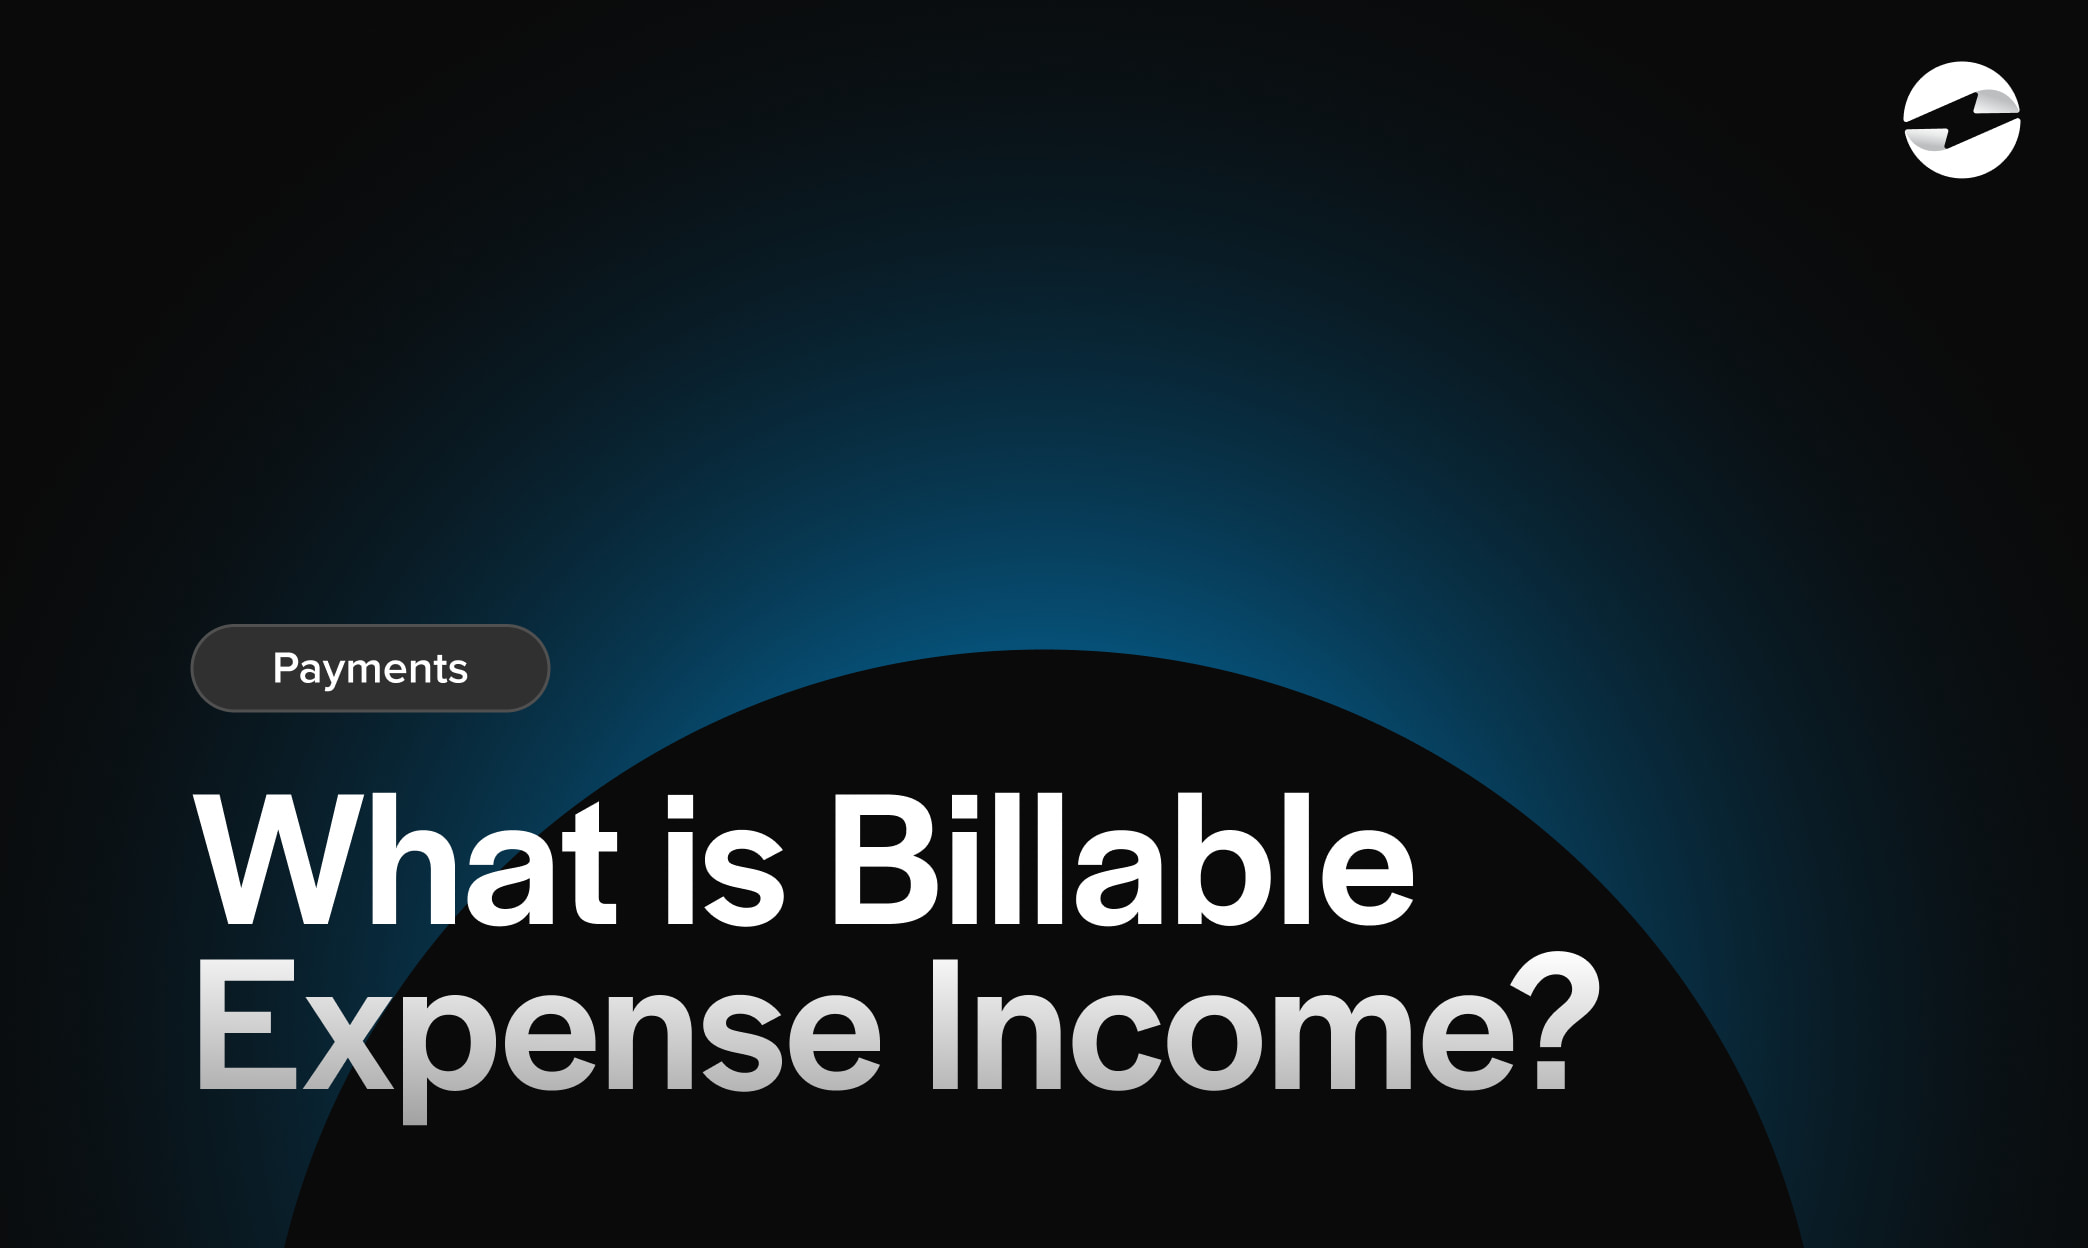 Billable Expense Income: What It Is, How to Track It, and More